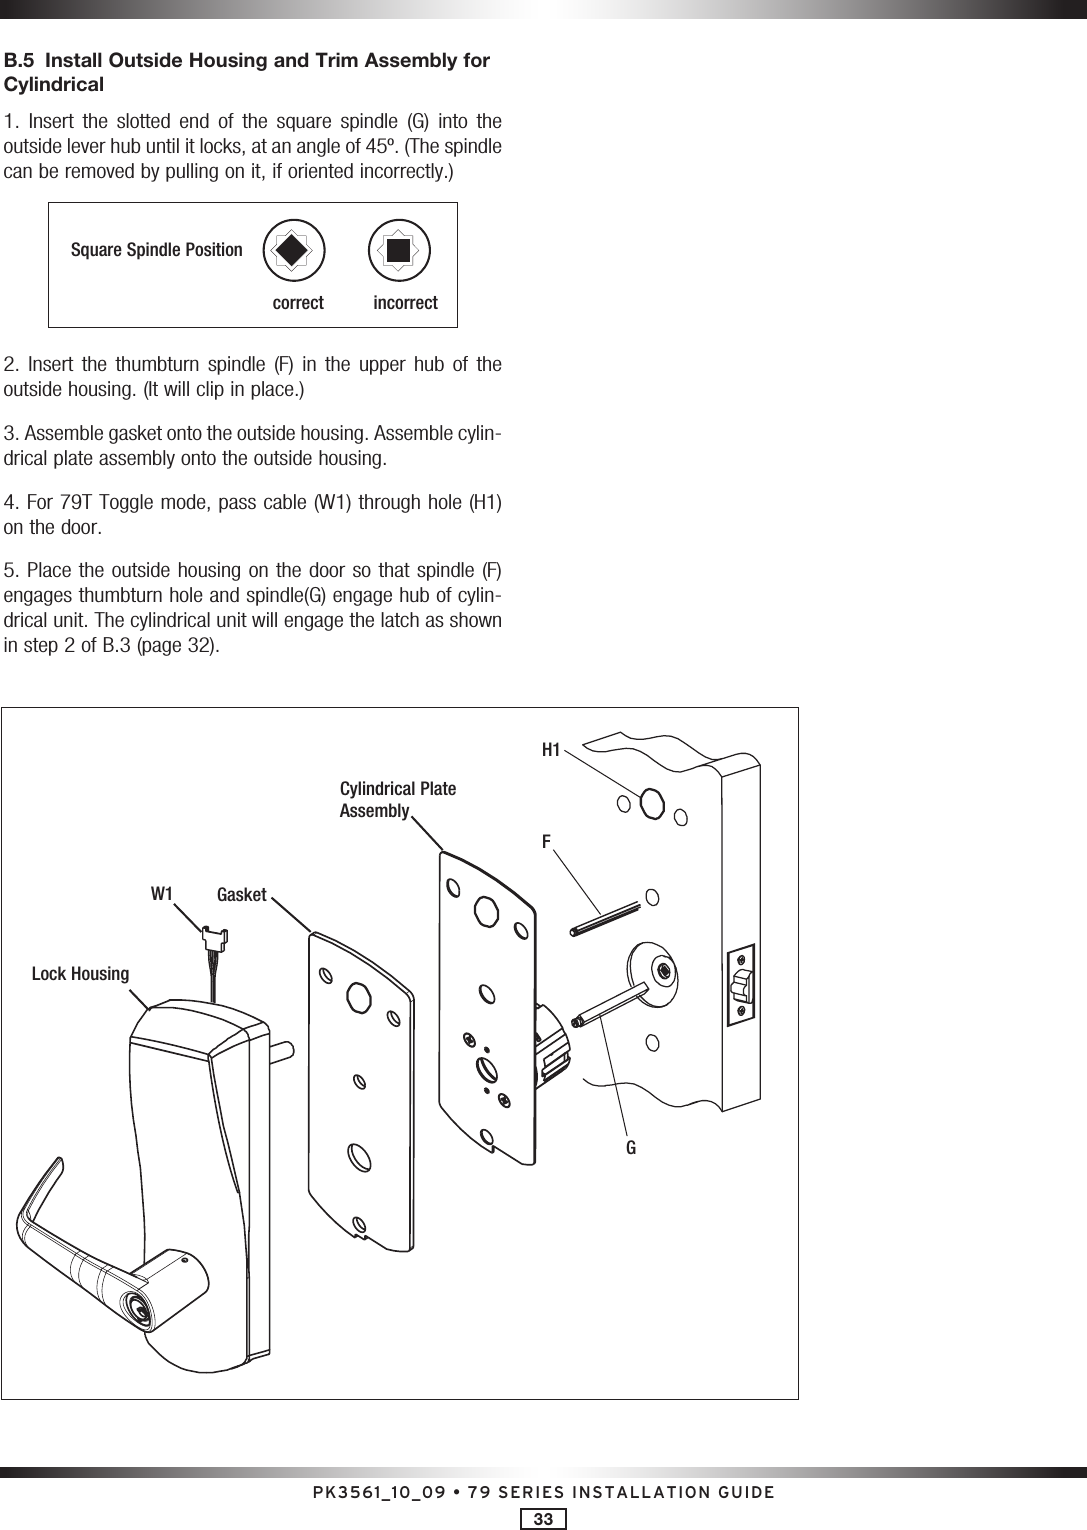 PK3561_10_09 • 79 SERIES INSTALLATION GUIDE33B.5  Install Outside Housing and Trim Assembly for Cylindrical 1.  Insert  the  slotted  end  of  the  square  spindle  (G)  into  the outside lever hub until it locks, at an angle of 45º. (The spindle can be removed by pulling on it, if oriented incorrectly.)Square Spindle Positioncorrect       incorrect2.  Insert  the  thumbturn  spindle  (F)  in  the  upper  hub  of  the outside housing. (It will clip in place.) 3. Assemble gasket onto the outside housing. Assemble cylin-drical plate assembly onto the outside housing. 4. For 79T Toggle mode, pass cable (W1) through hole (H1) on the door. 5. Place the outside housing on the door so that spindle (F) engages thumbturn hole and spindle(G) engage hub of cylin-drical unit. The cylindrical unit will engage the latch as shown in step 2 of B.3 (page 32).Lock HousingGasketW1Cylindrical Plate AssemblyFH1G